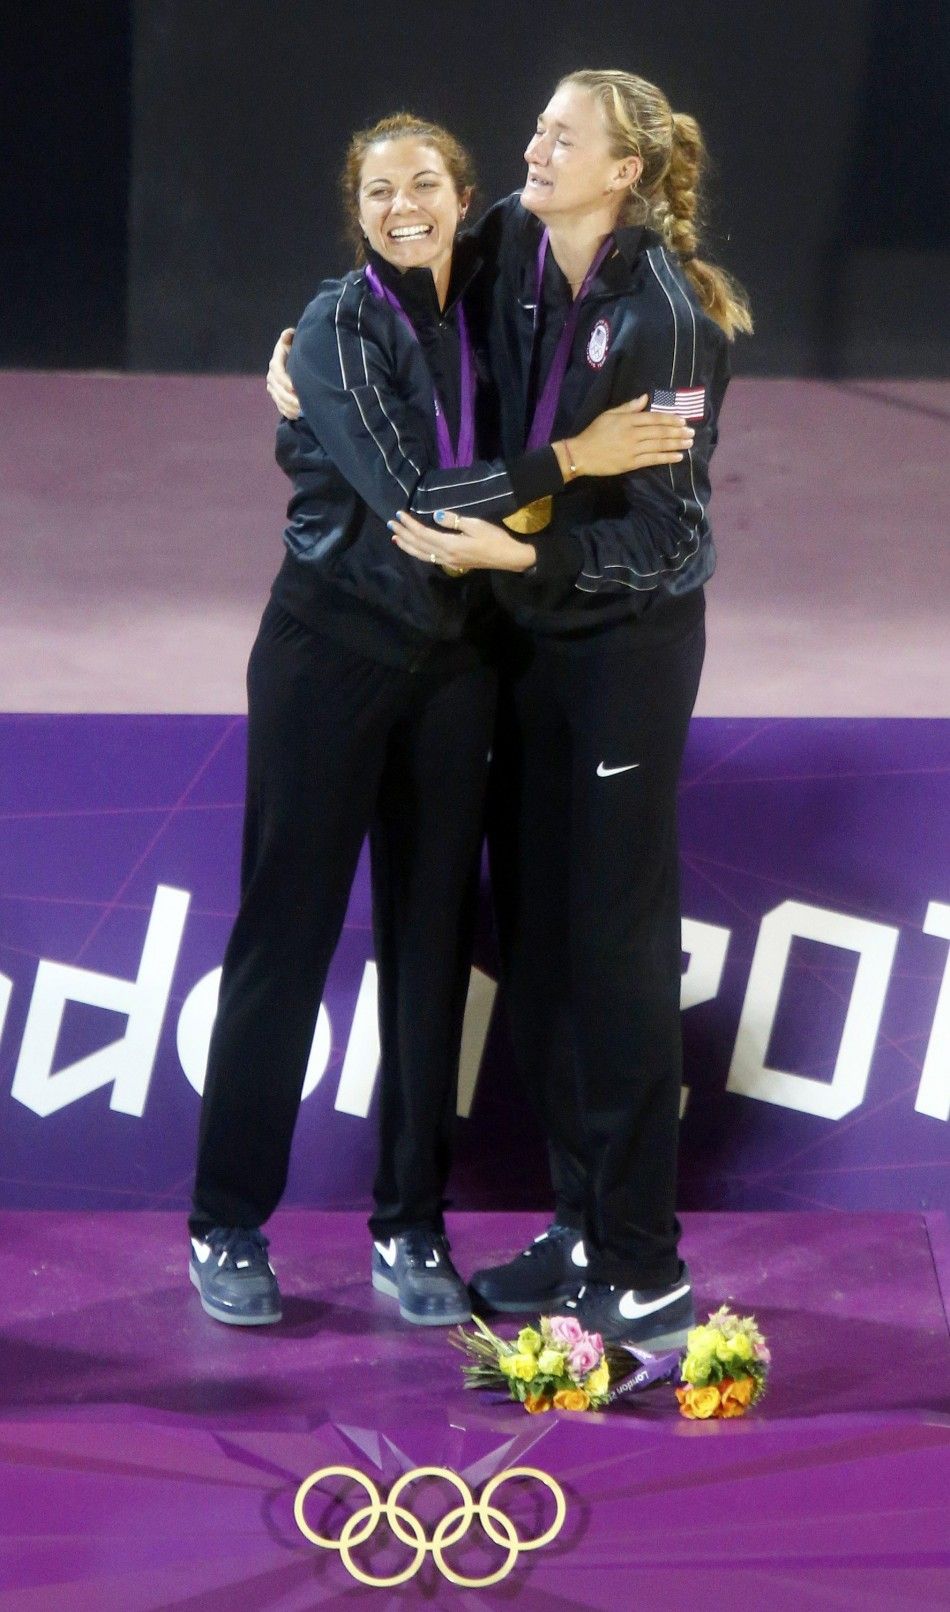 Gold Medal Winners For the U.S. at London Olympics